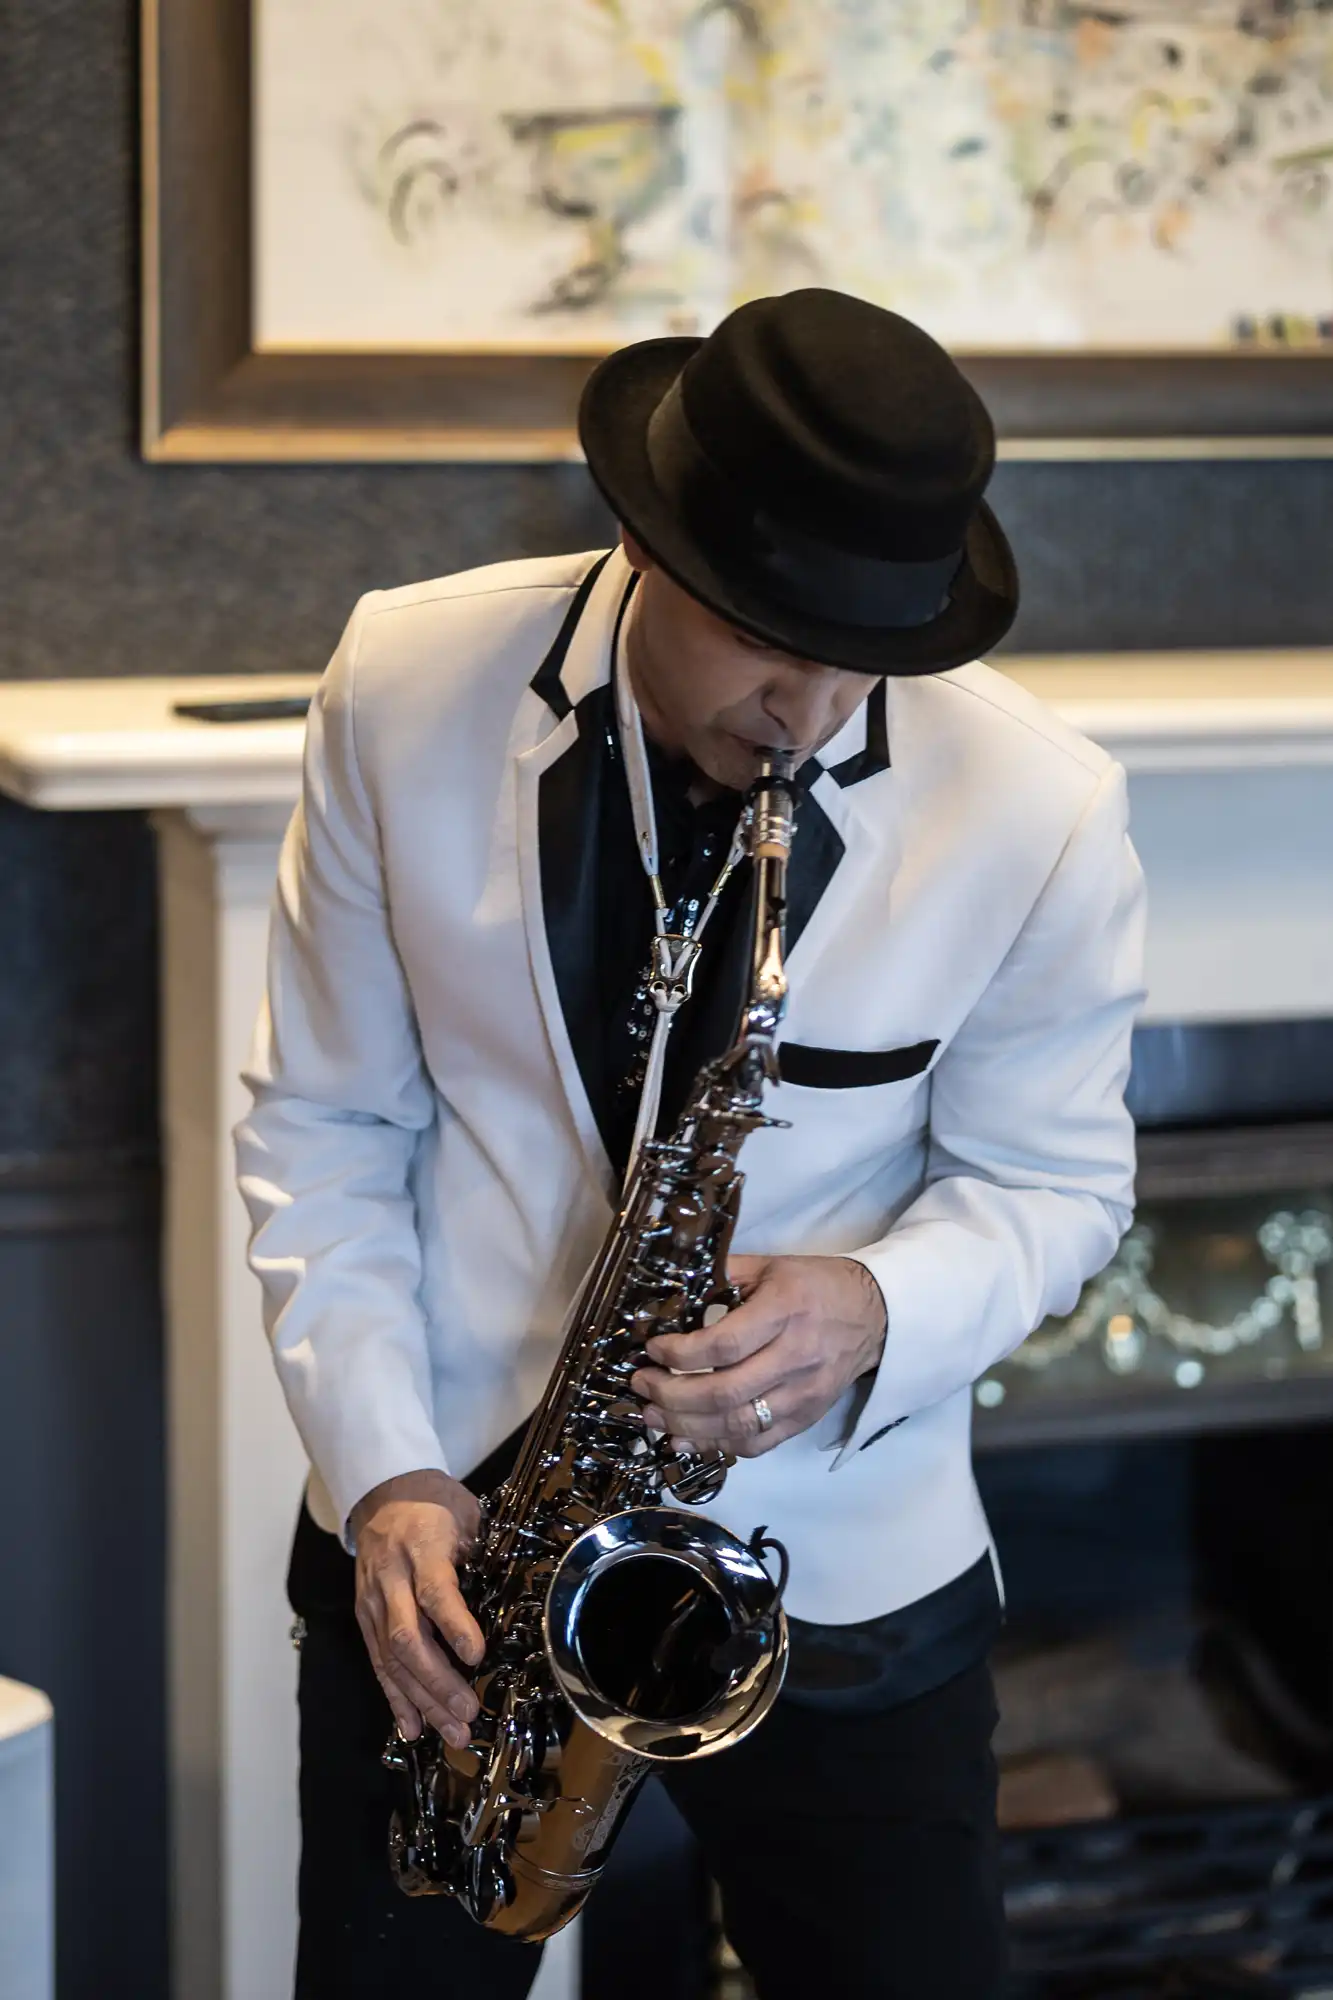 Man in a white jacket and black hat playing a saxophone indoors.